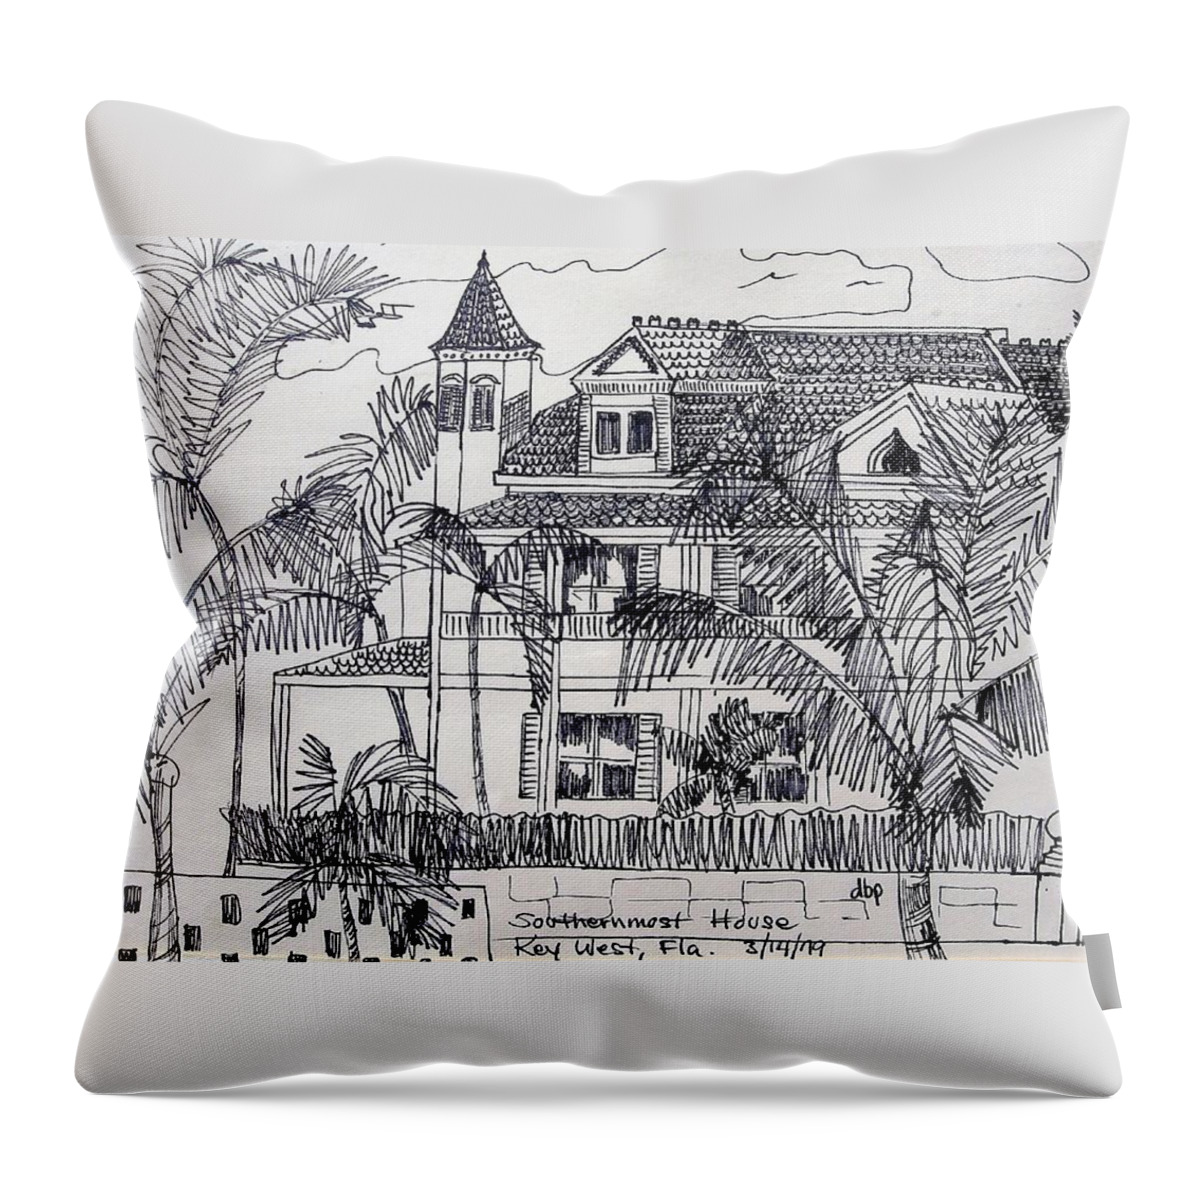 Southernmost House Throw Pillow featuring the mixed media Southernmost House Key West Florida by Diane Pape